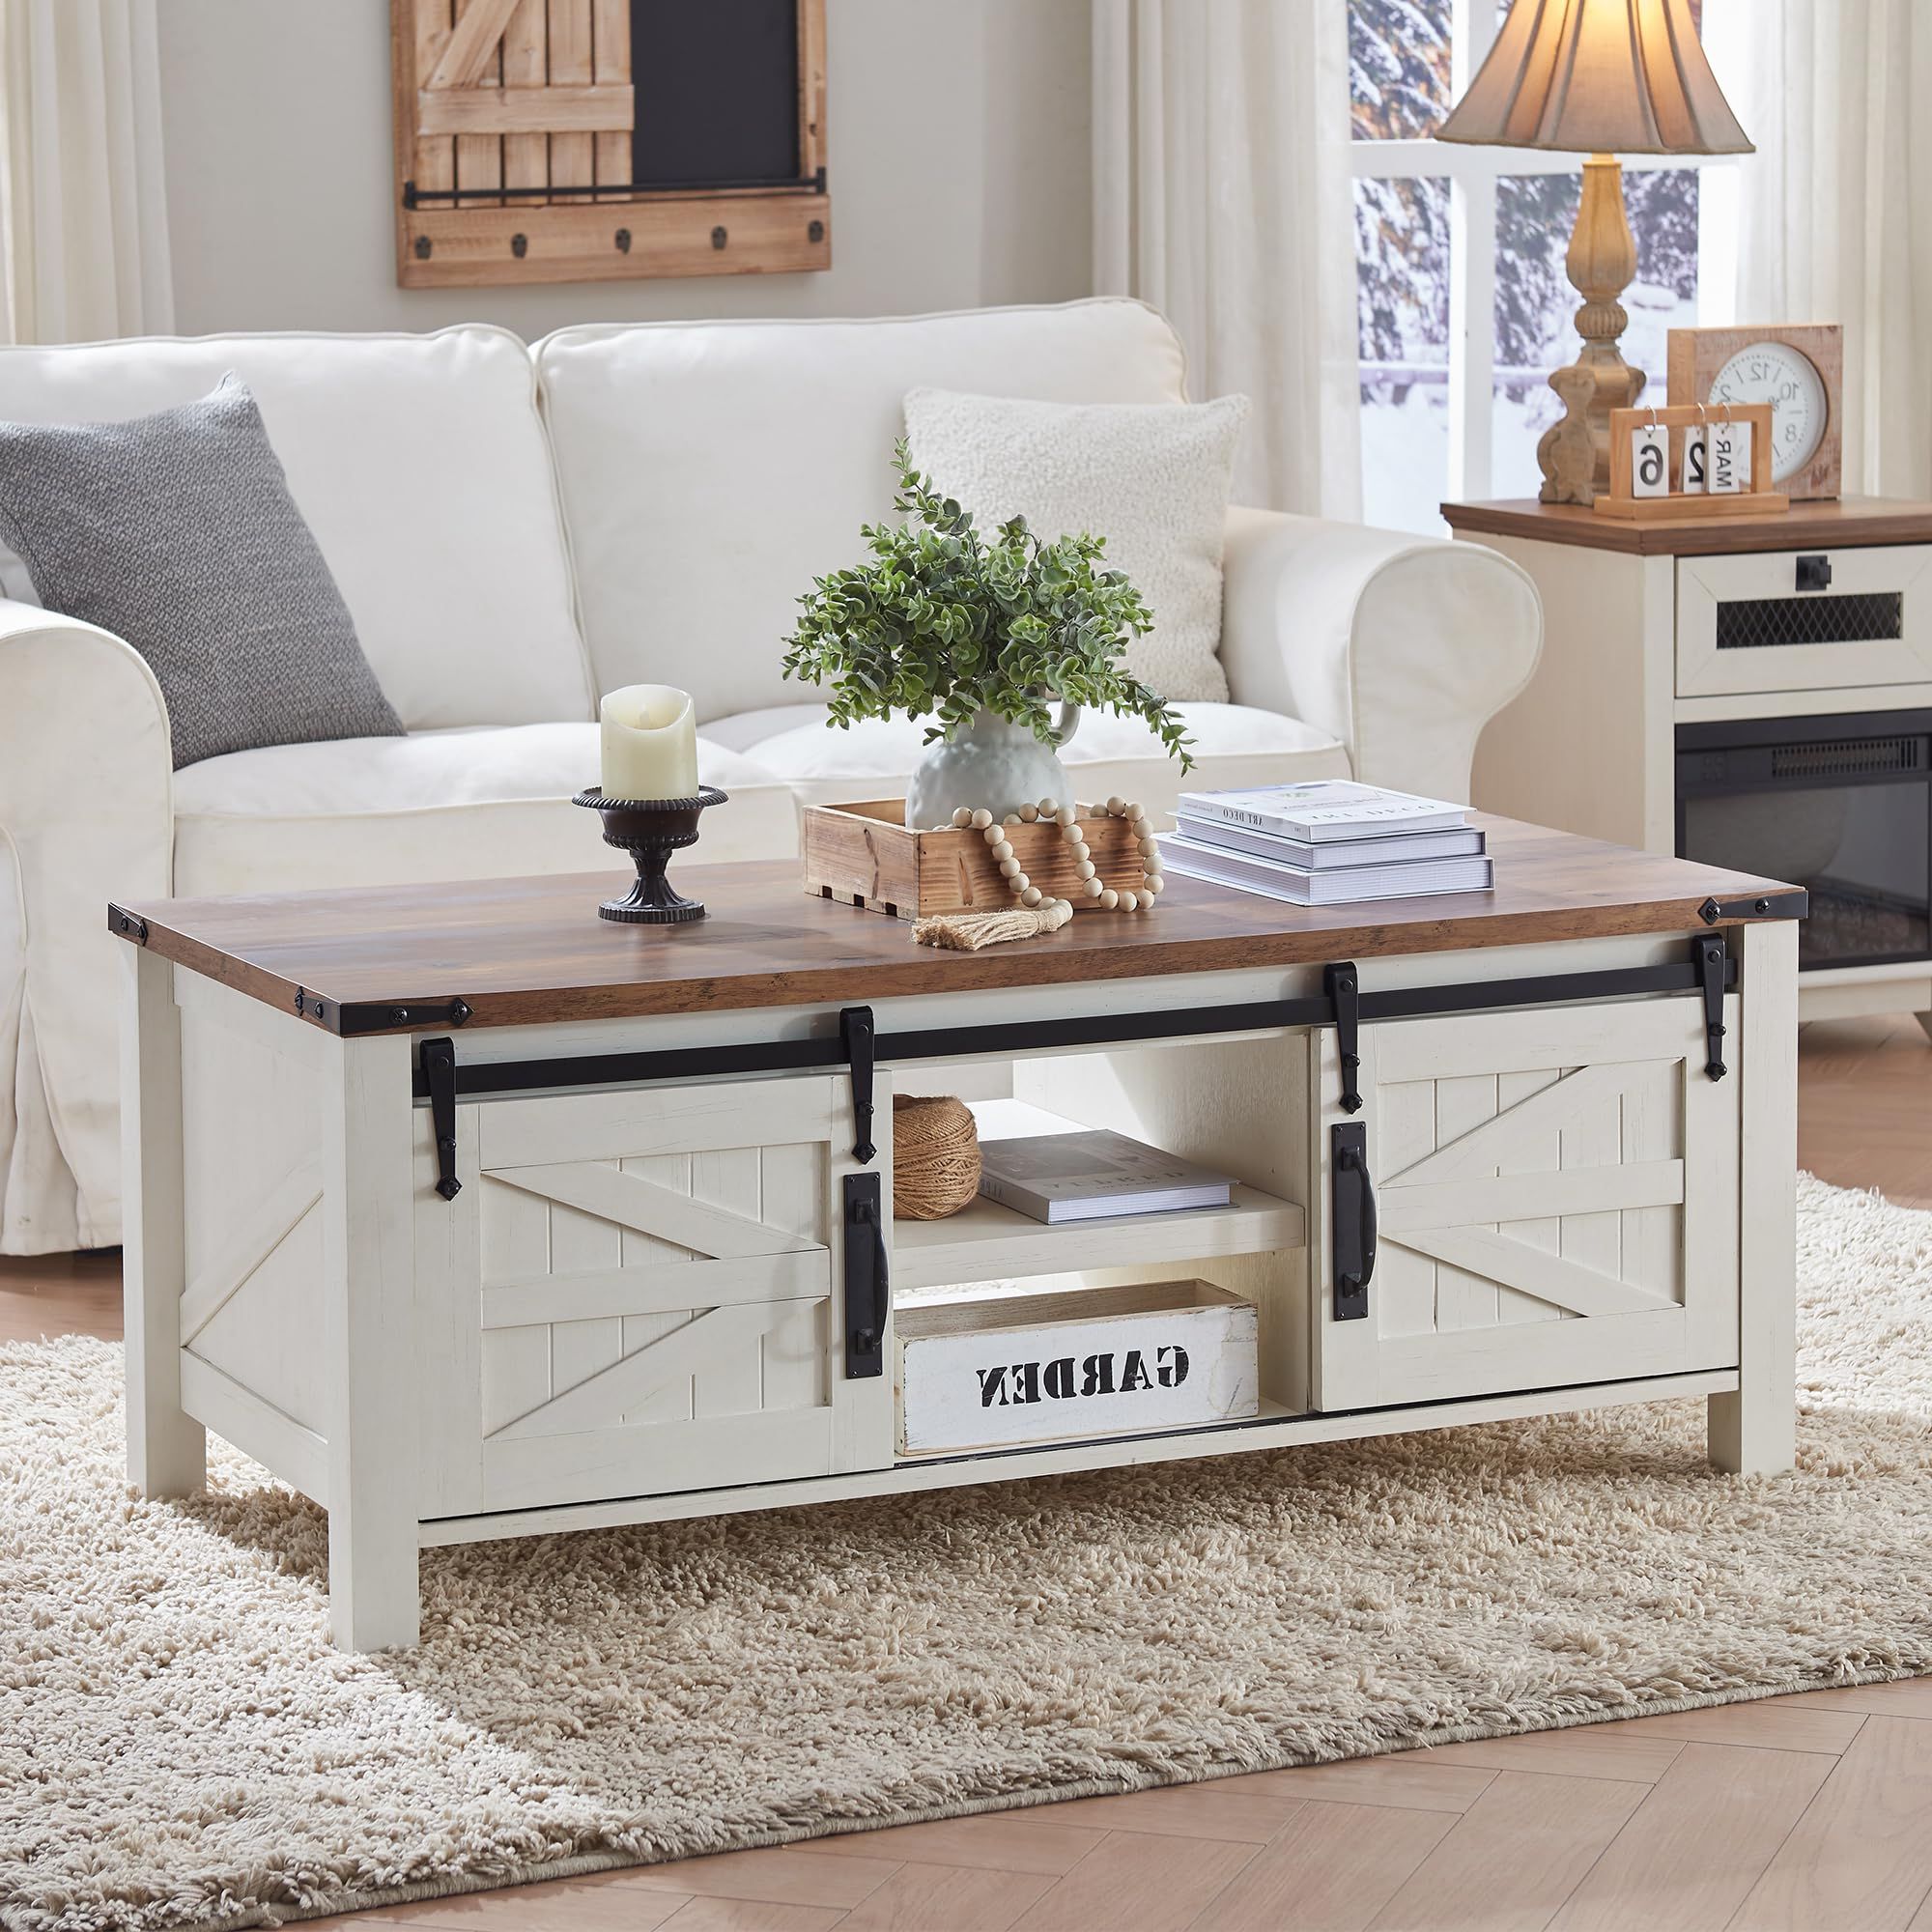 Coffee Tables With Storage And Barn Doors Pertaining To Trendy Amazon: Okd Farmhouse Coffee Table, 48" Storage Center Table With Sliding  Barn Doors, Rustic Wood Rectangular Cocktail Table With W/adjustable Shelves  For Living Room, Antique White : Home & Kitchen (Photo 6 of 10)